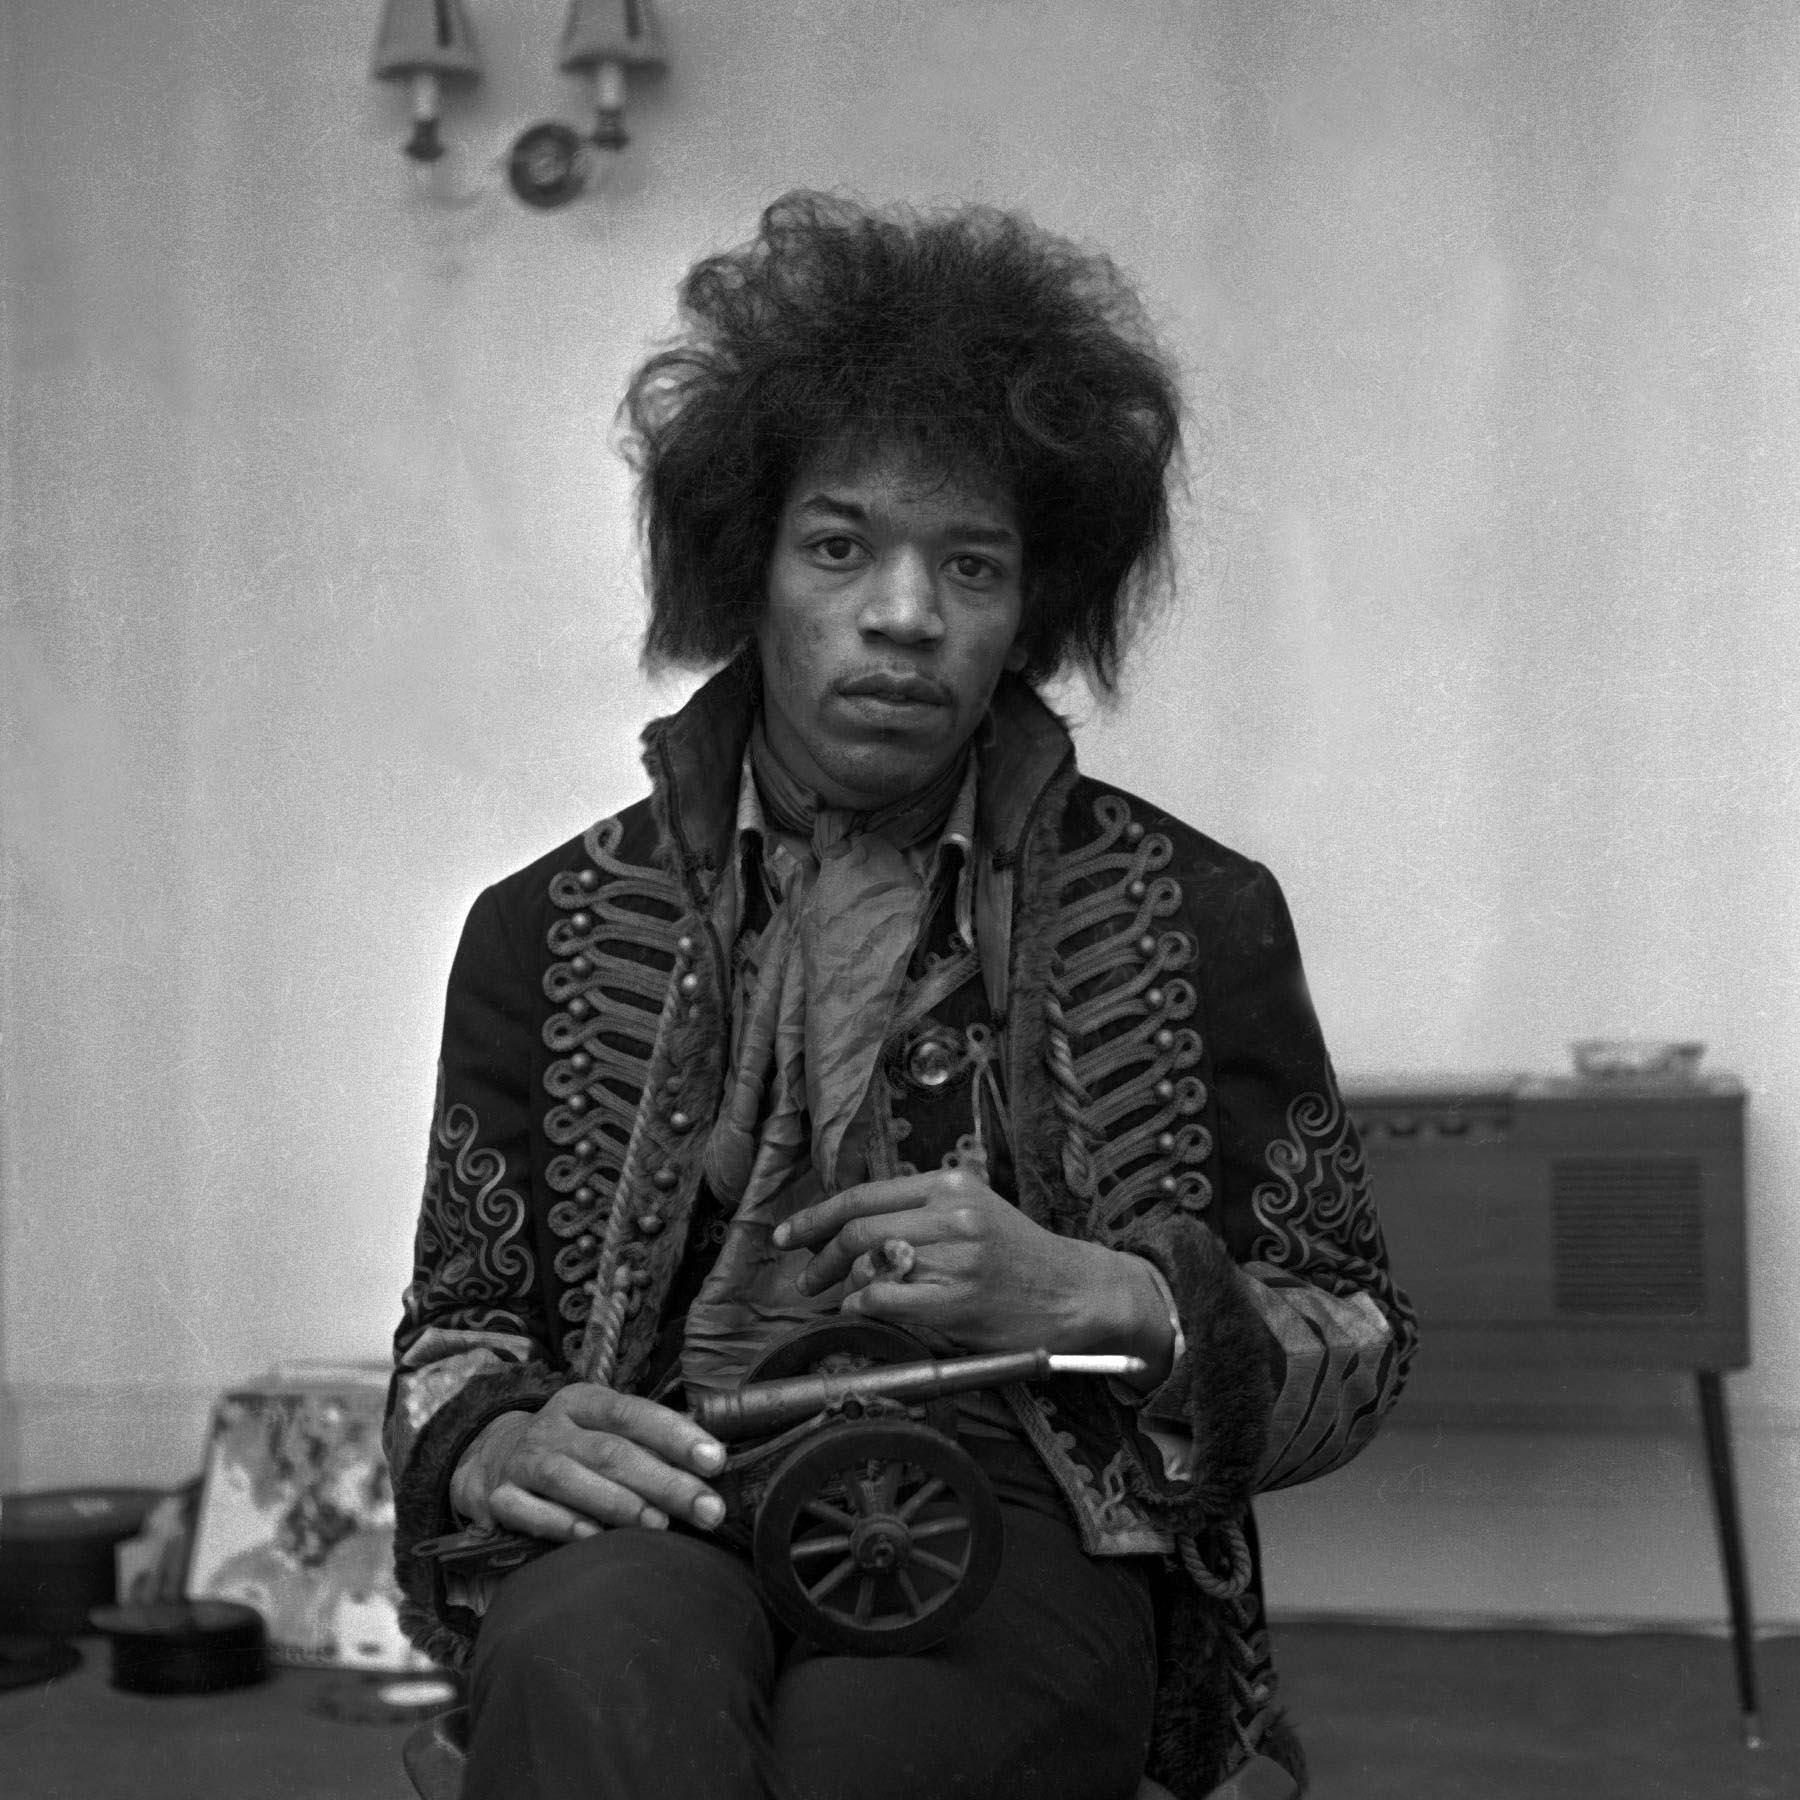 hendrix jimi guitar guitarist american rock singer getty acoustic playing special stolen recordings why owned premium gq jagger statement lead